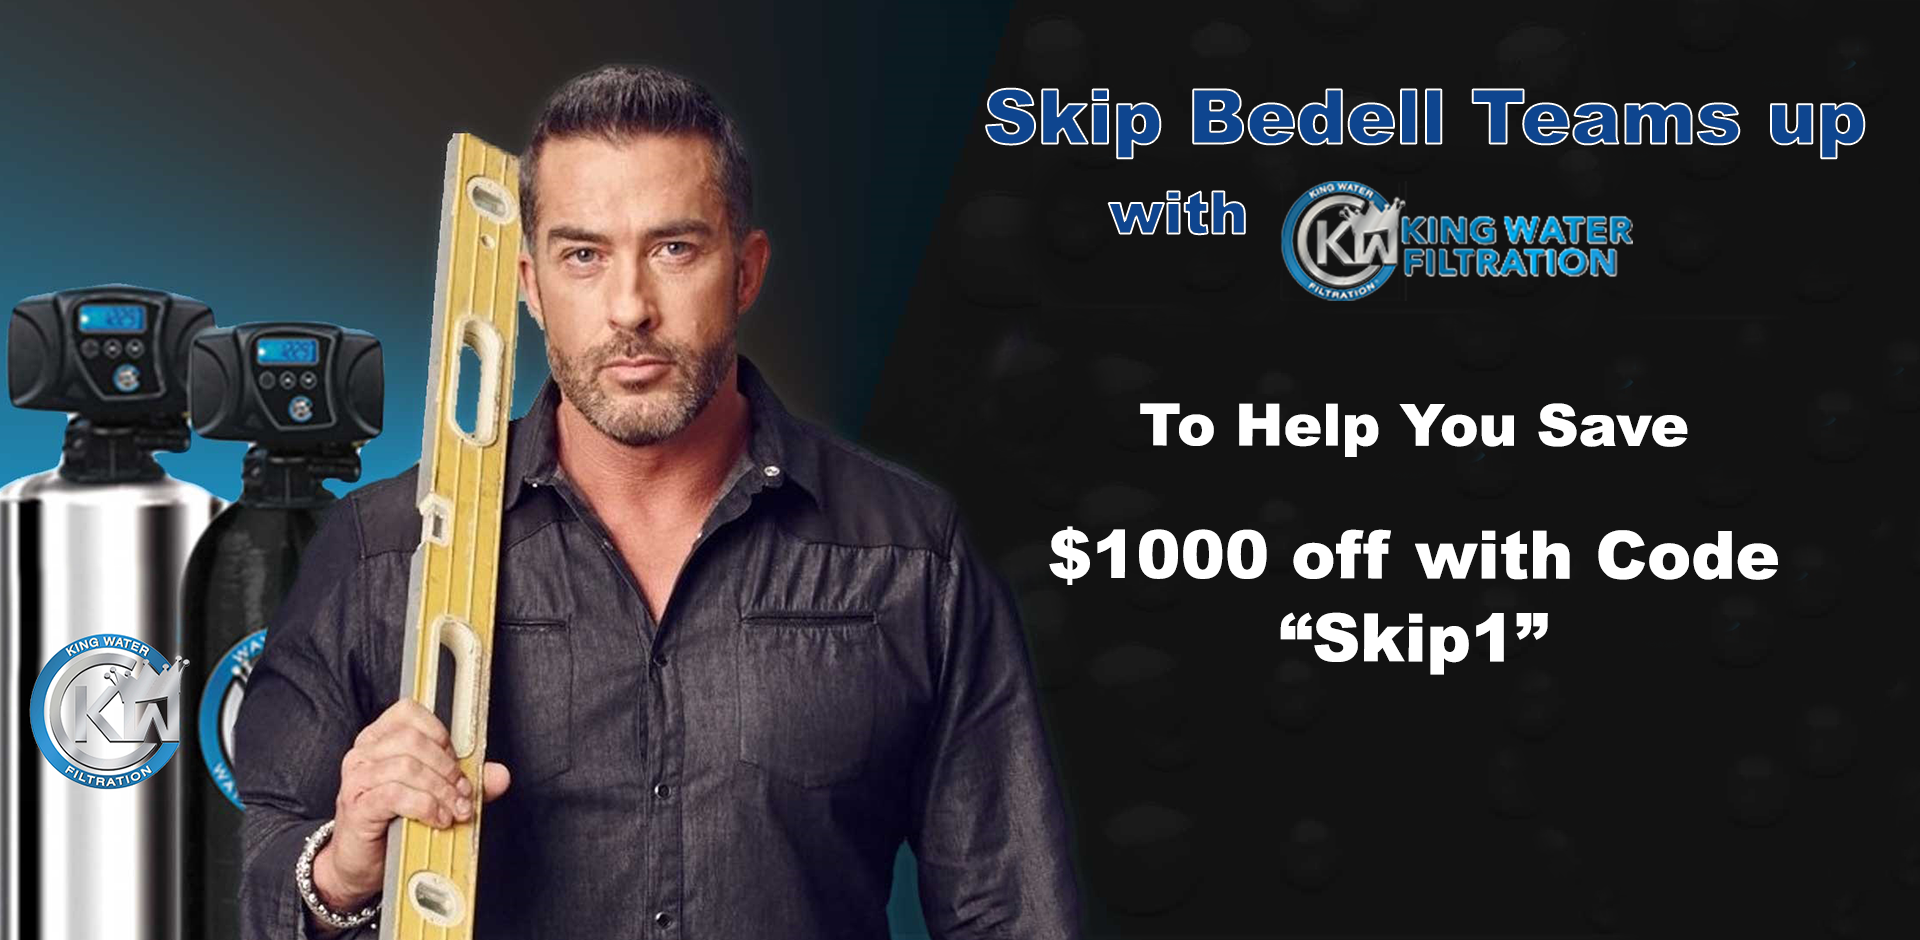 Skip Bedell has teamed up with King Water Filtration to show you how you can have the healthiest water, right in your own home.